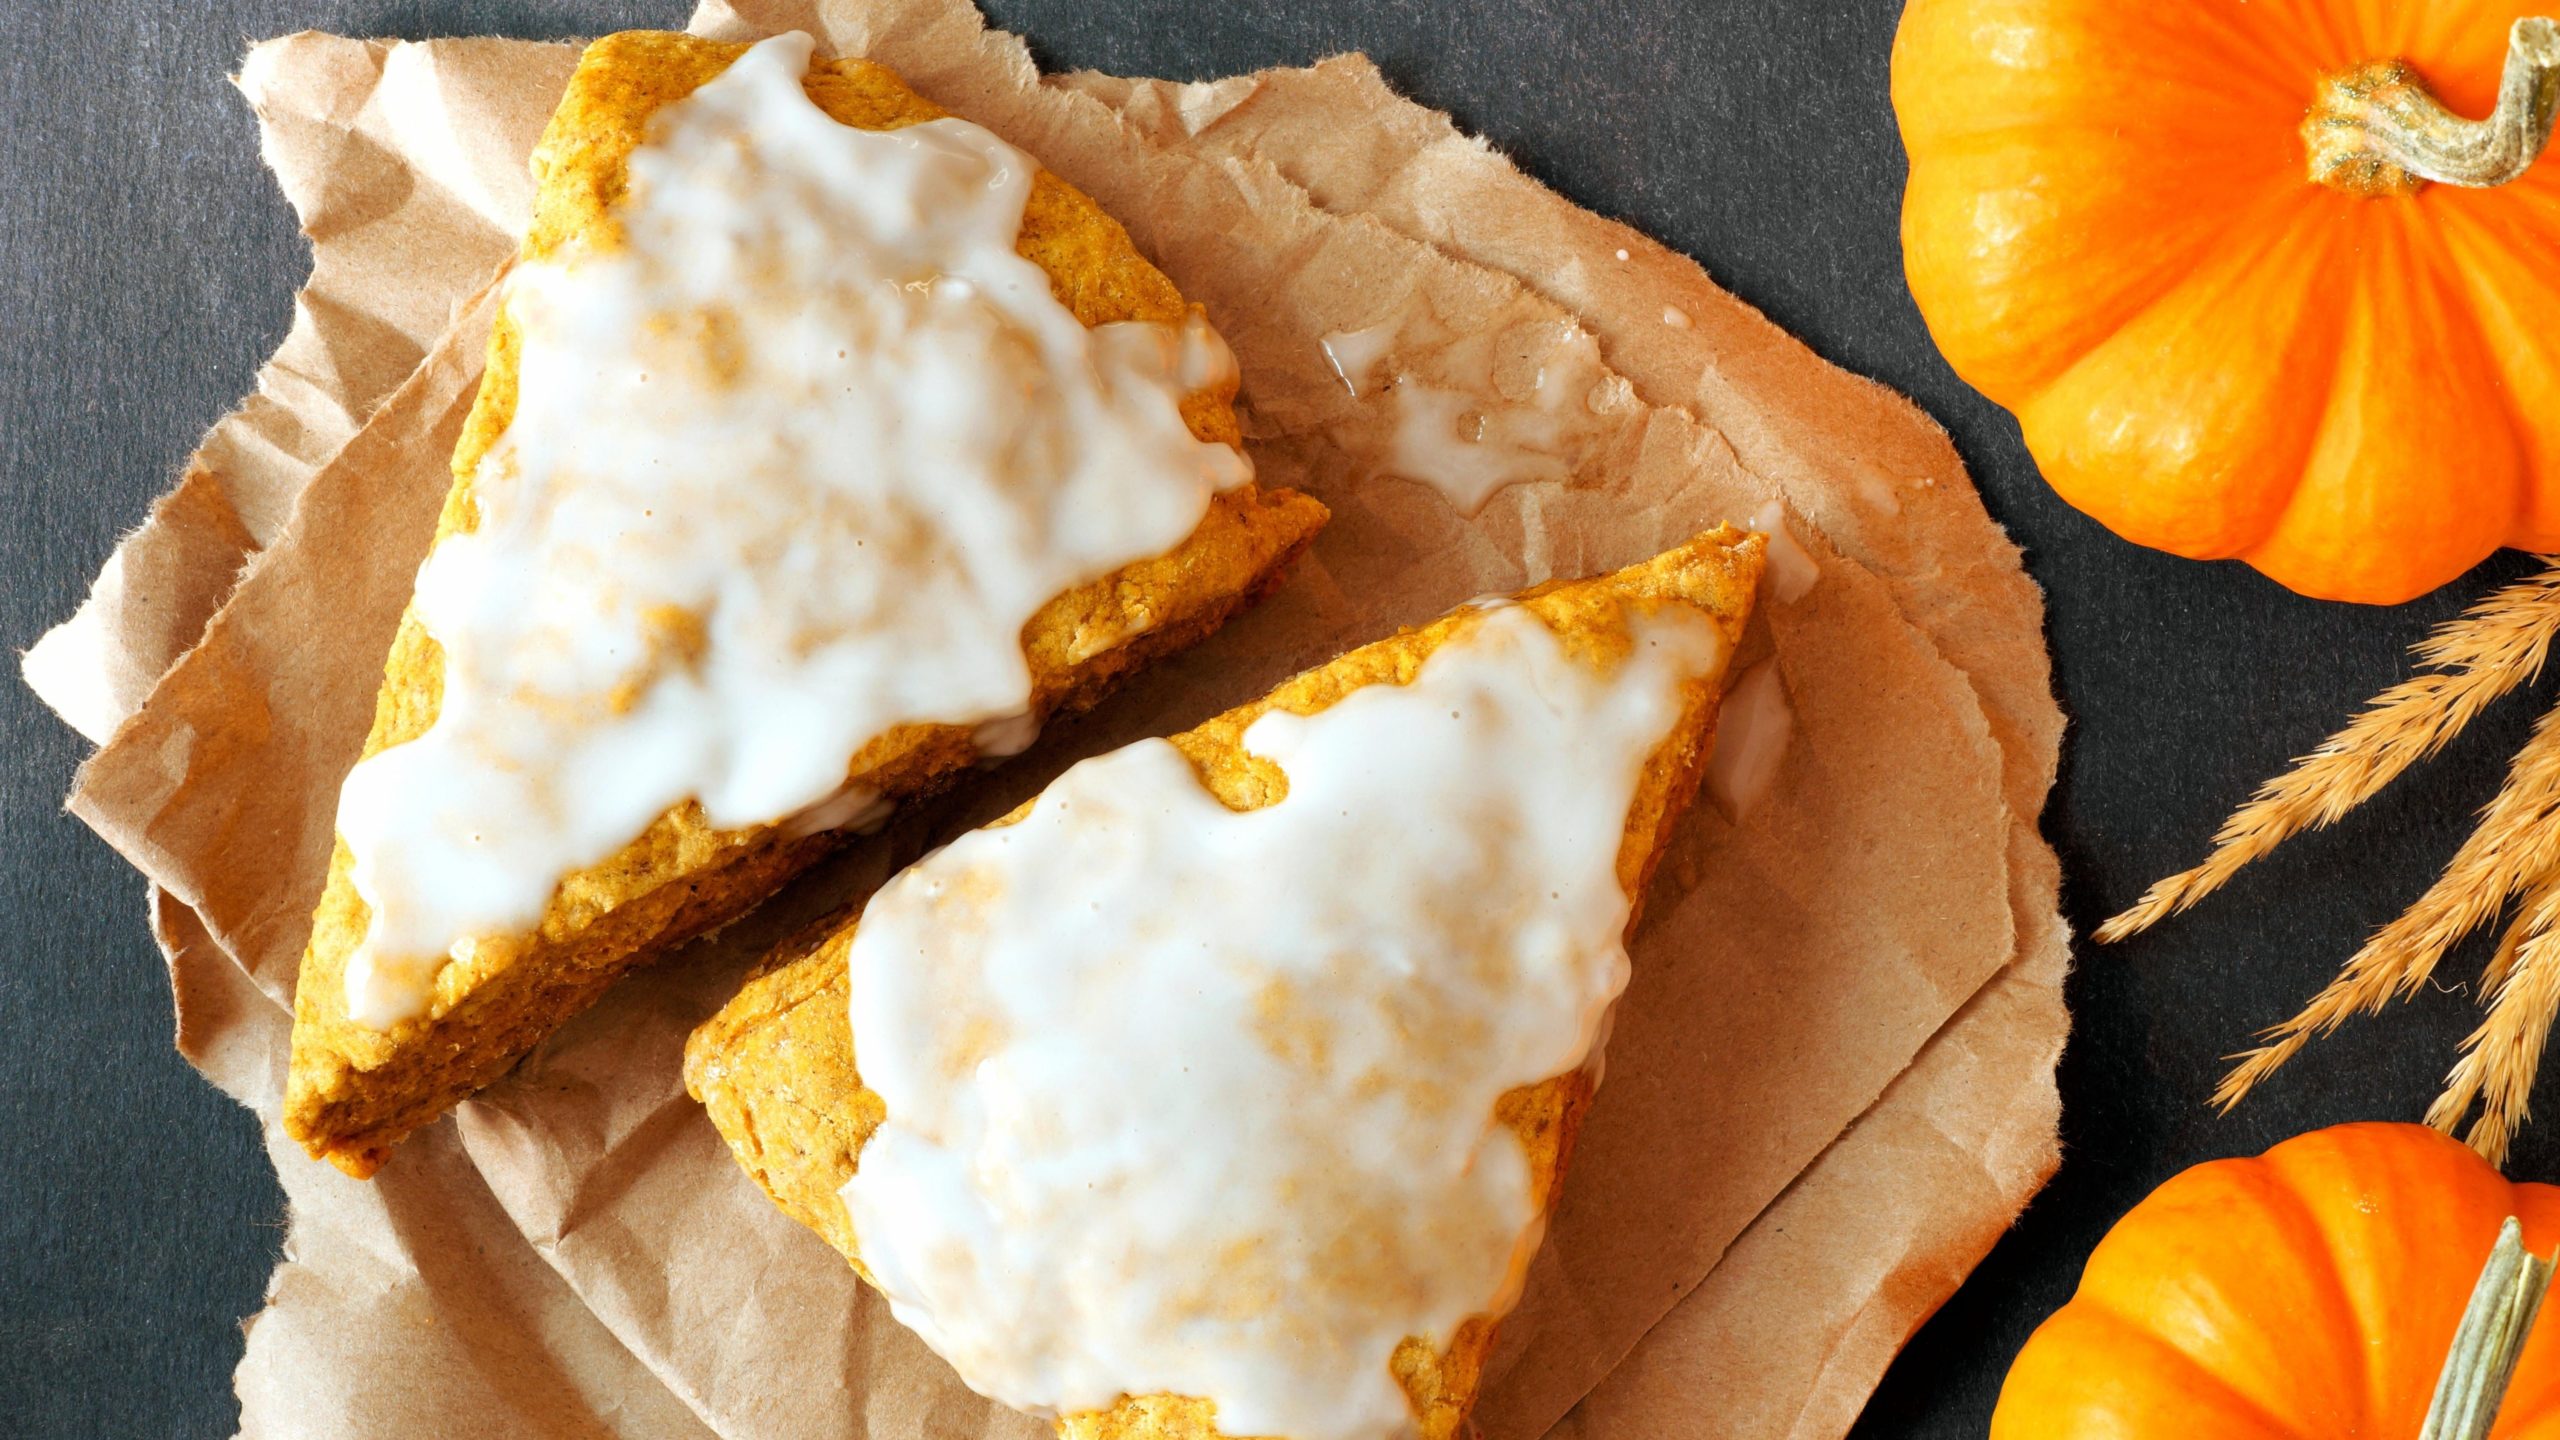 The Best Pumpkin Spice Item Is the Scone, You Fools